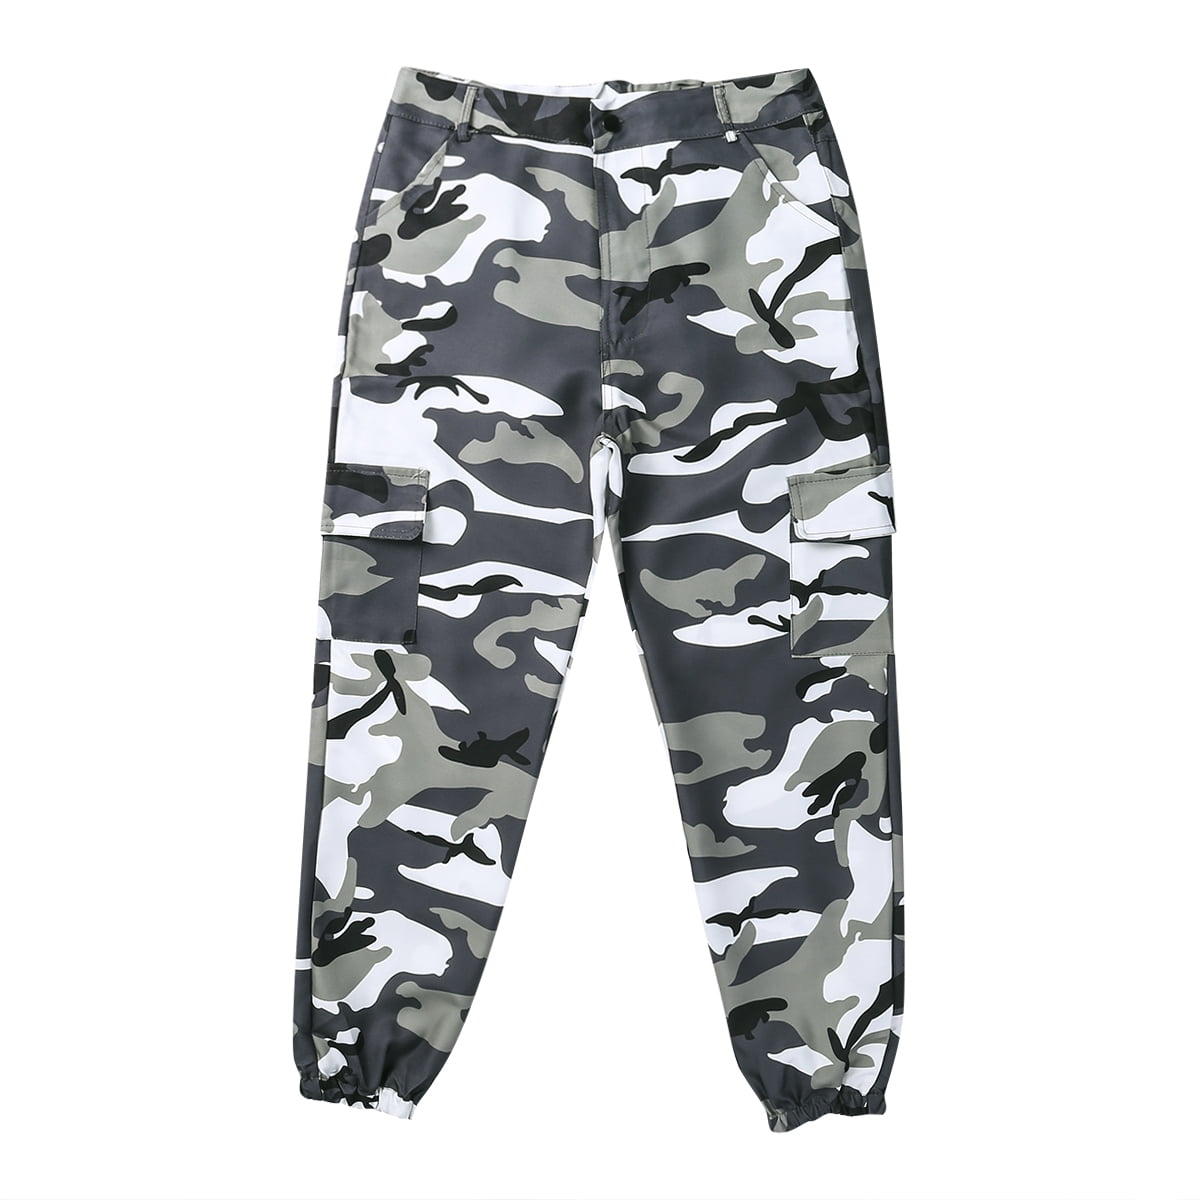 CHGBMOK Clearance Pants for Women High Waist Slim Fit Jogger Cargo  Camouflage Pants for With Matching Belt